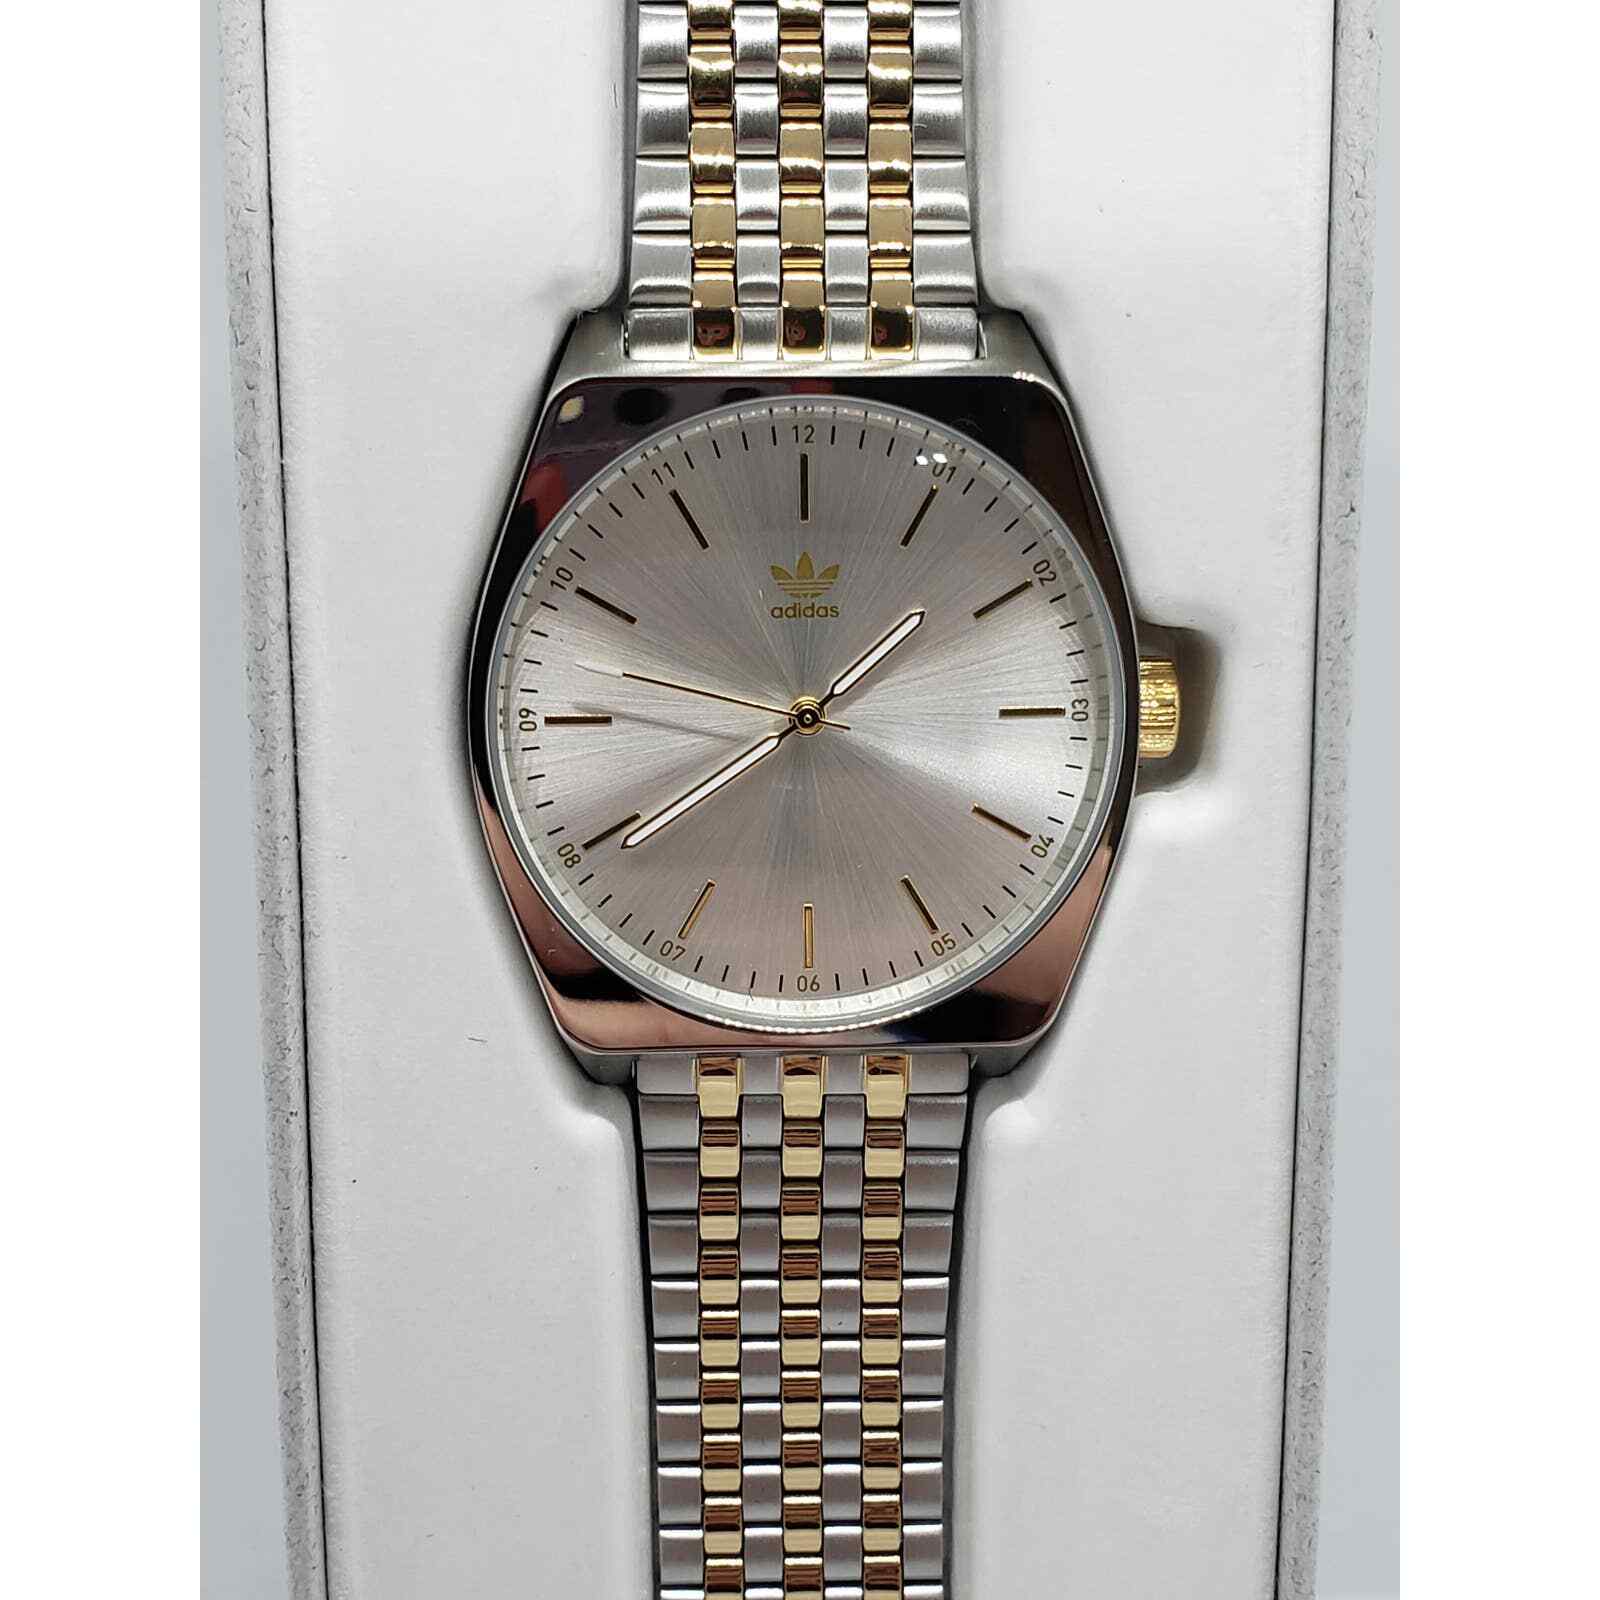 Adidas by Nixon men's watch. Silver face with gold accents Z021921-00 New In box